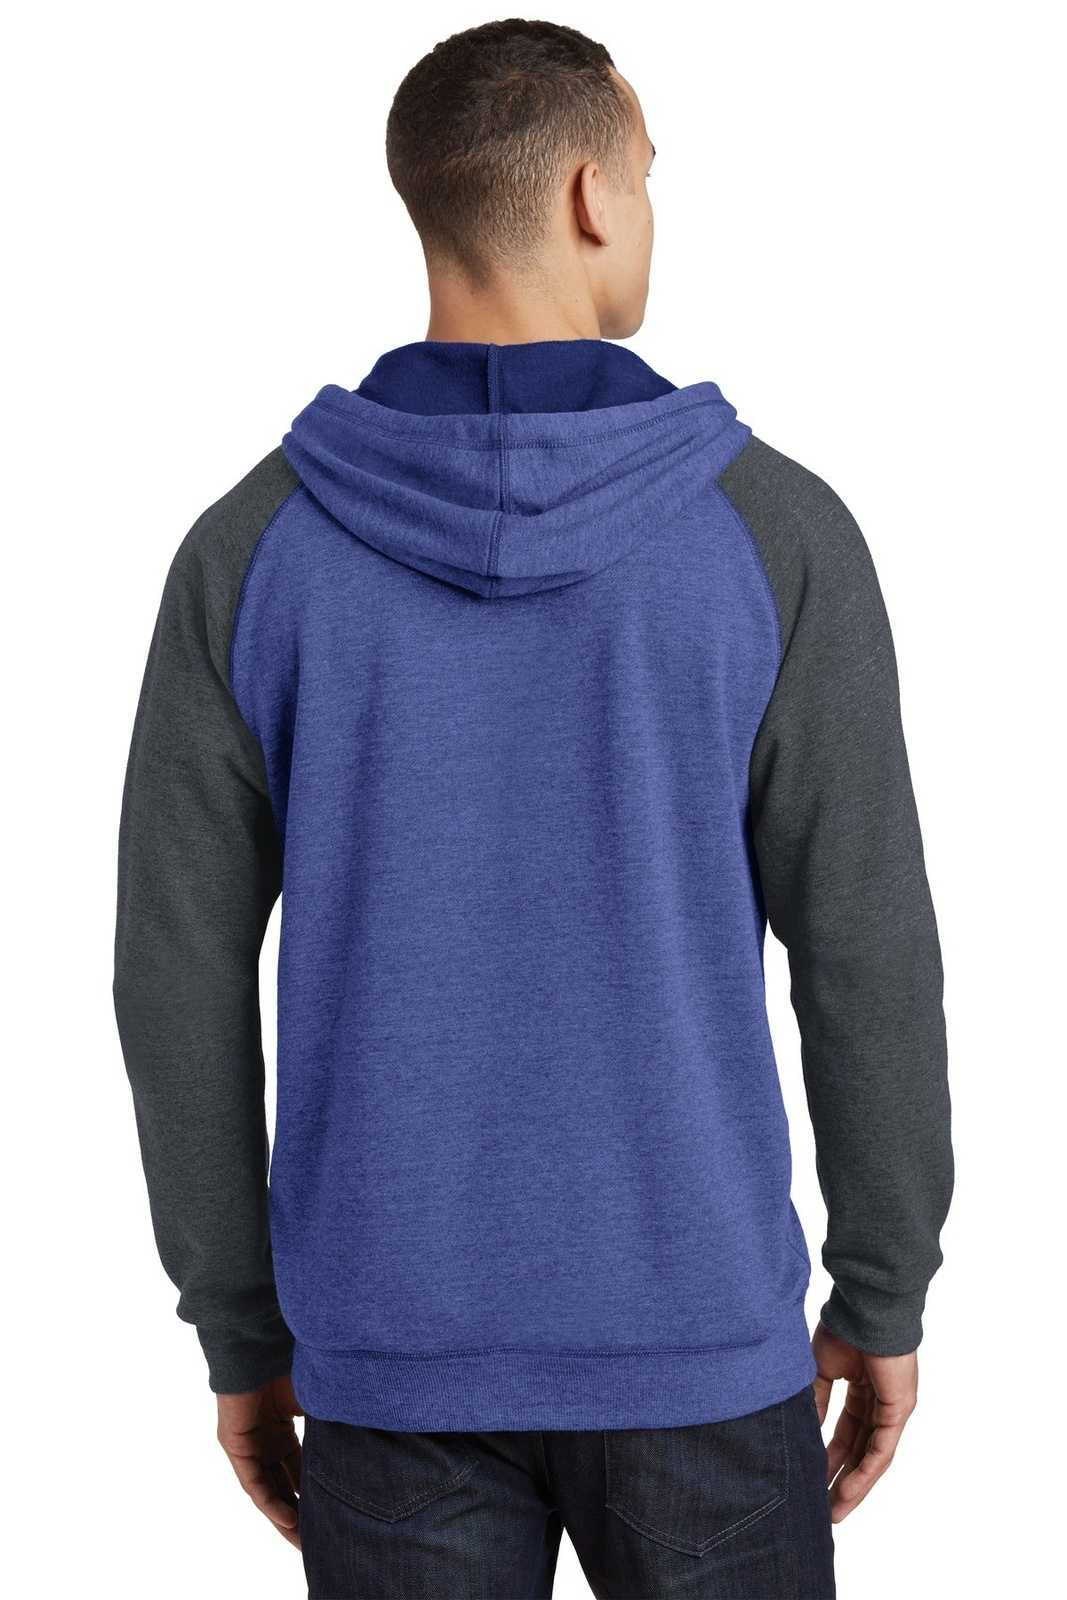 District DT196 Young Mens Lightweight Fleece Raglan Hoodie - Heathered Deep Royal Heathered Charcoal - HIT a Double - 1